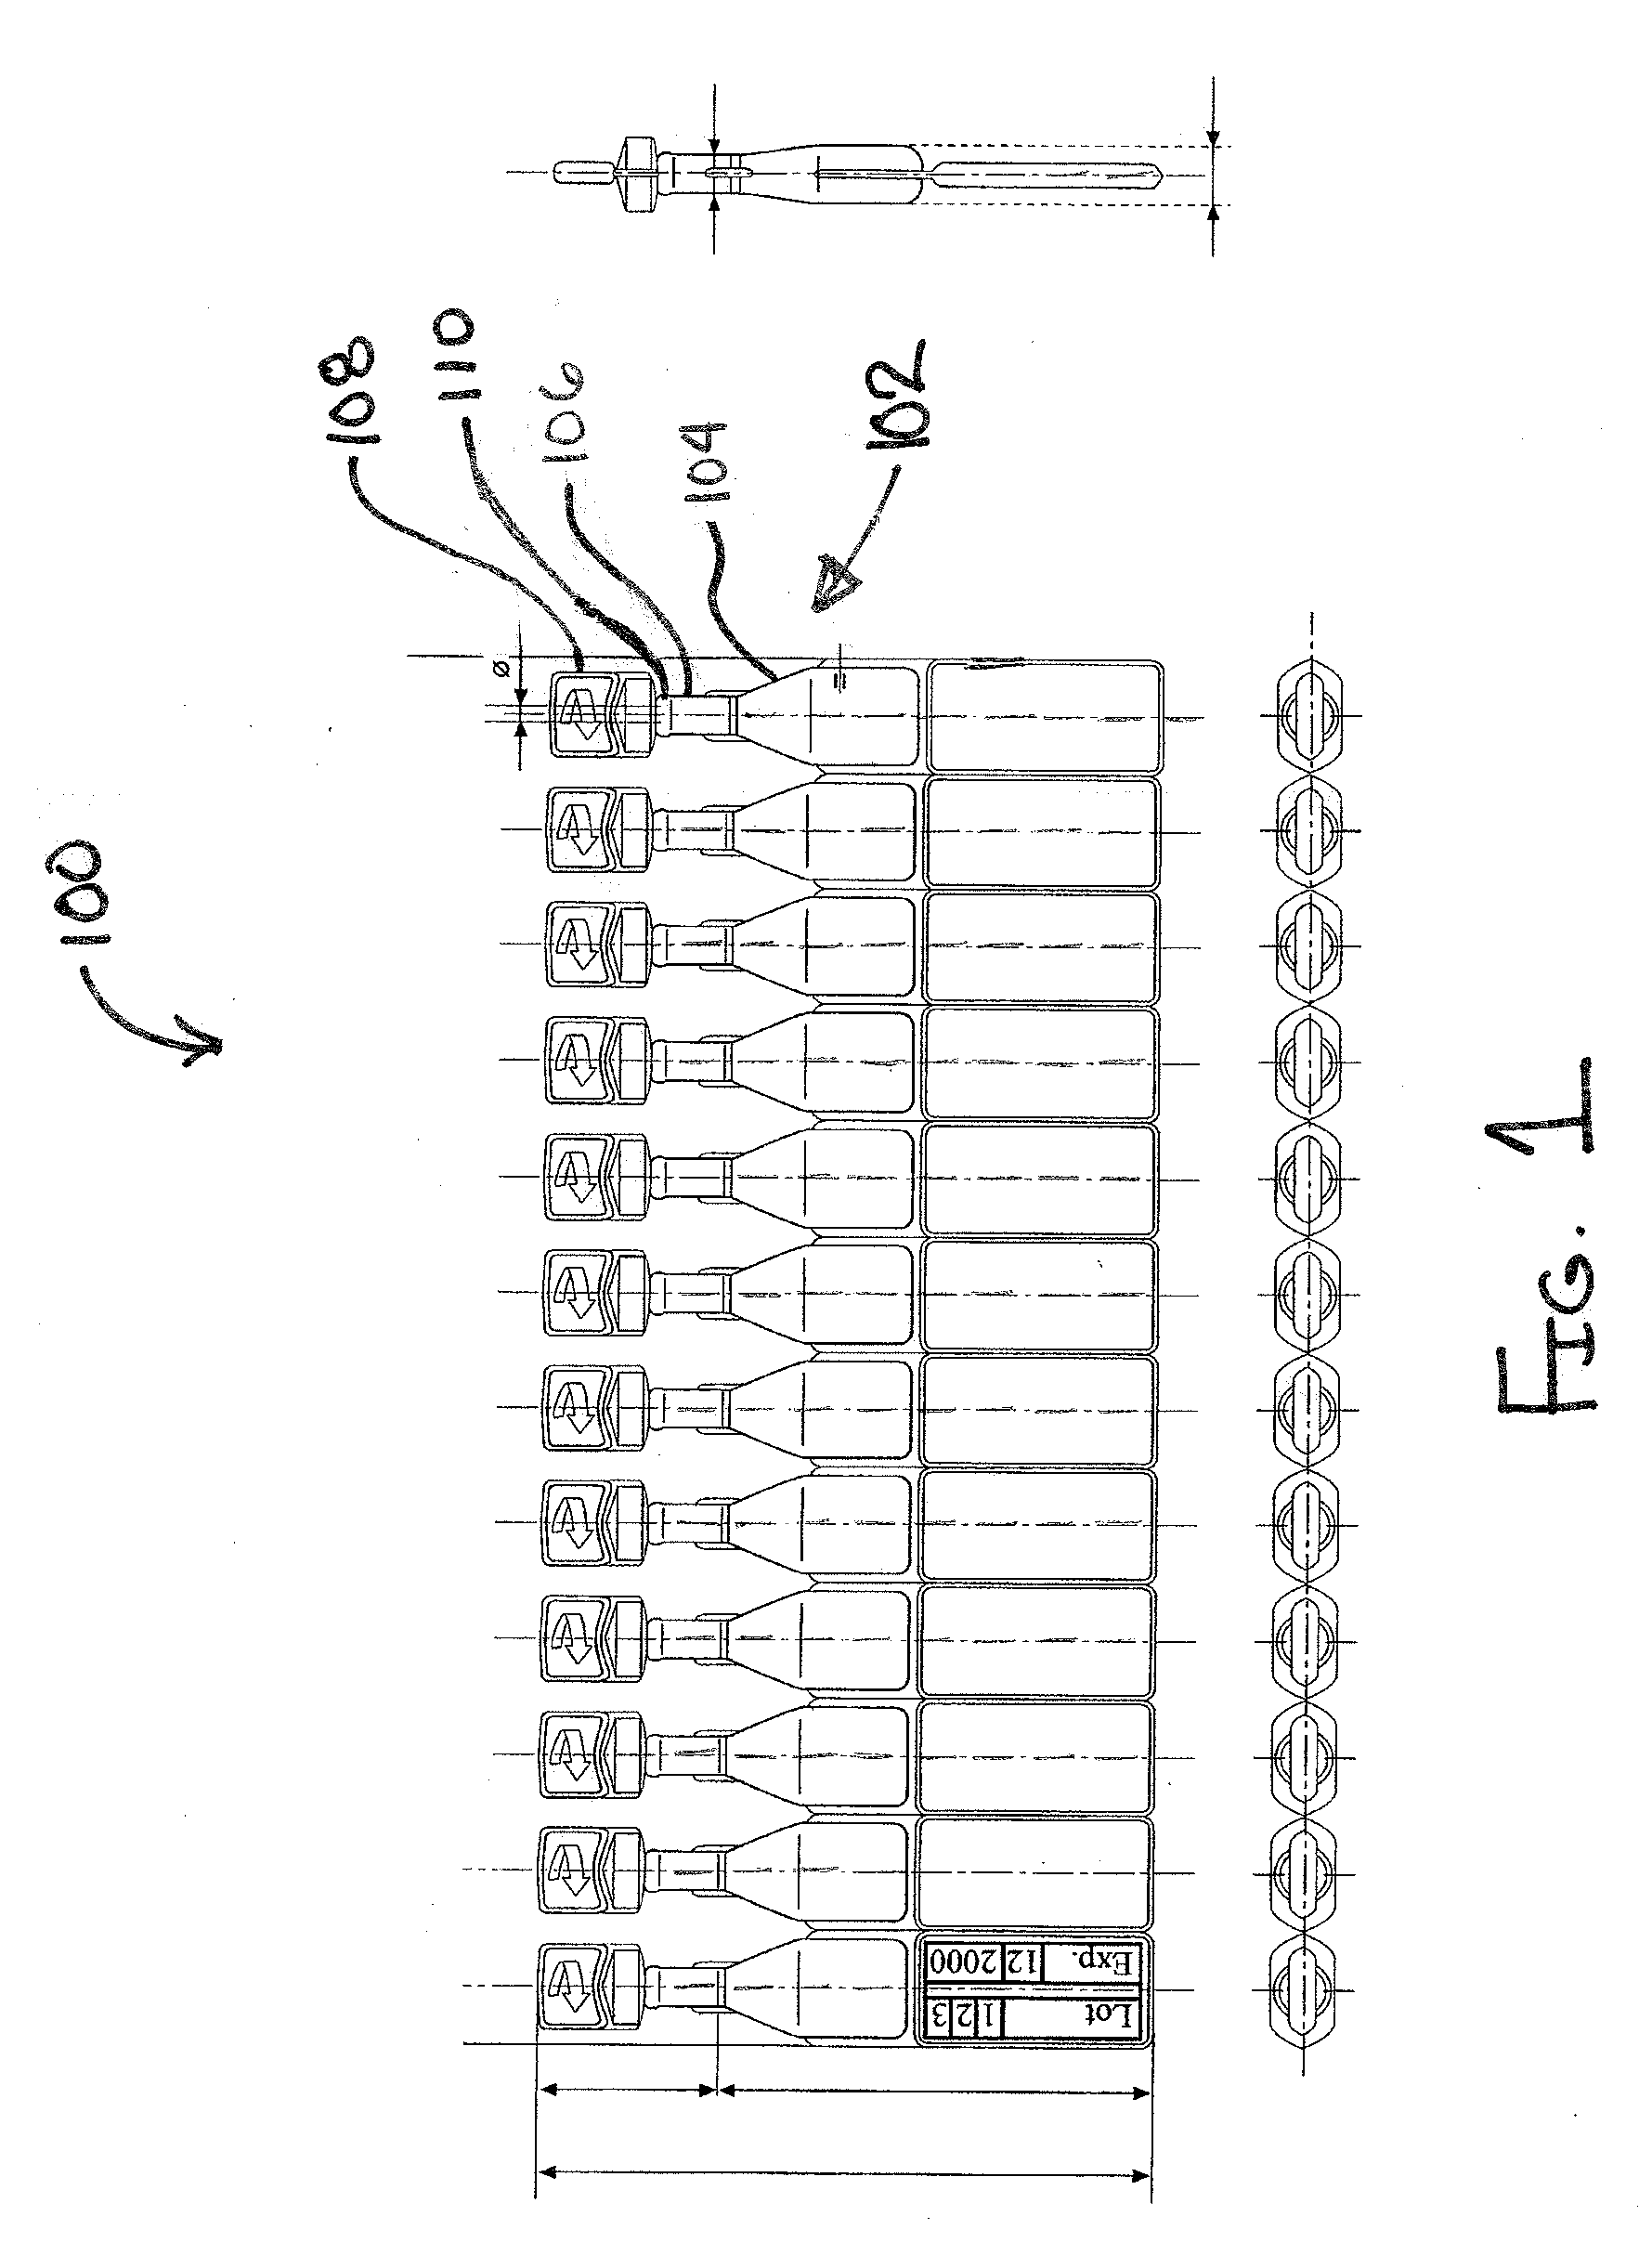 Method of administering a substance to the throat